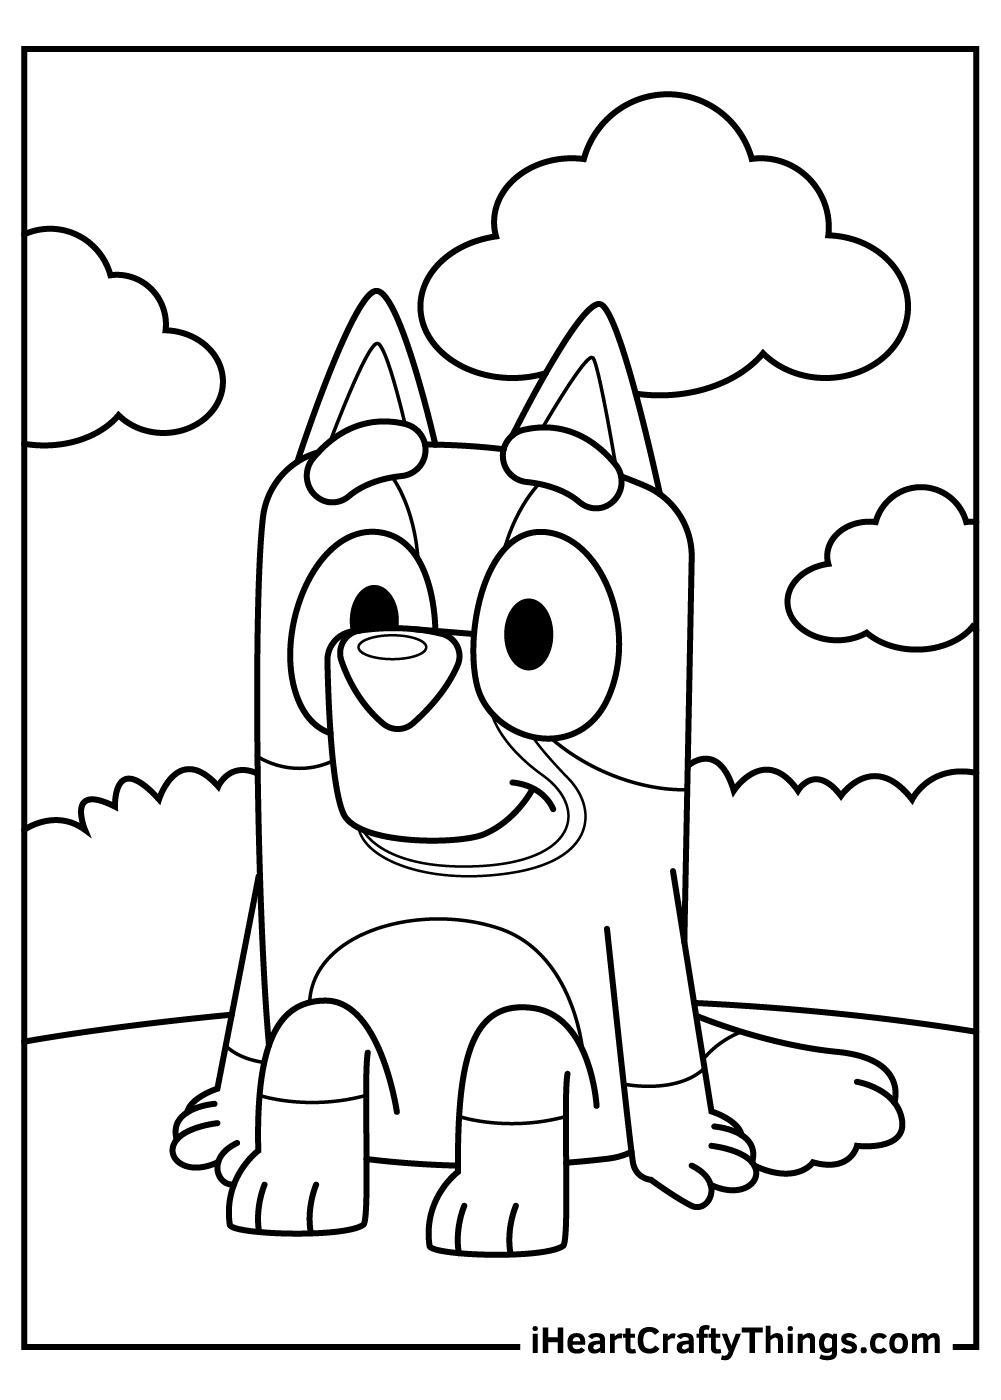 Bluey Coloring Pages Updated 20